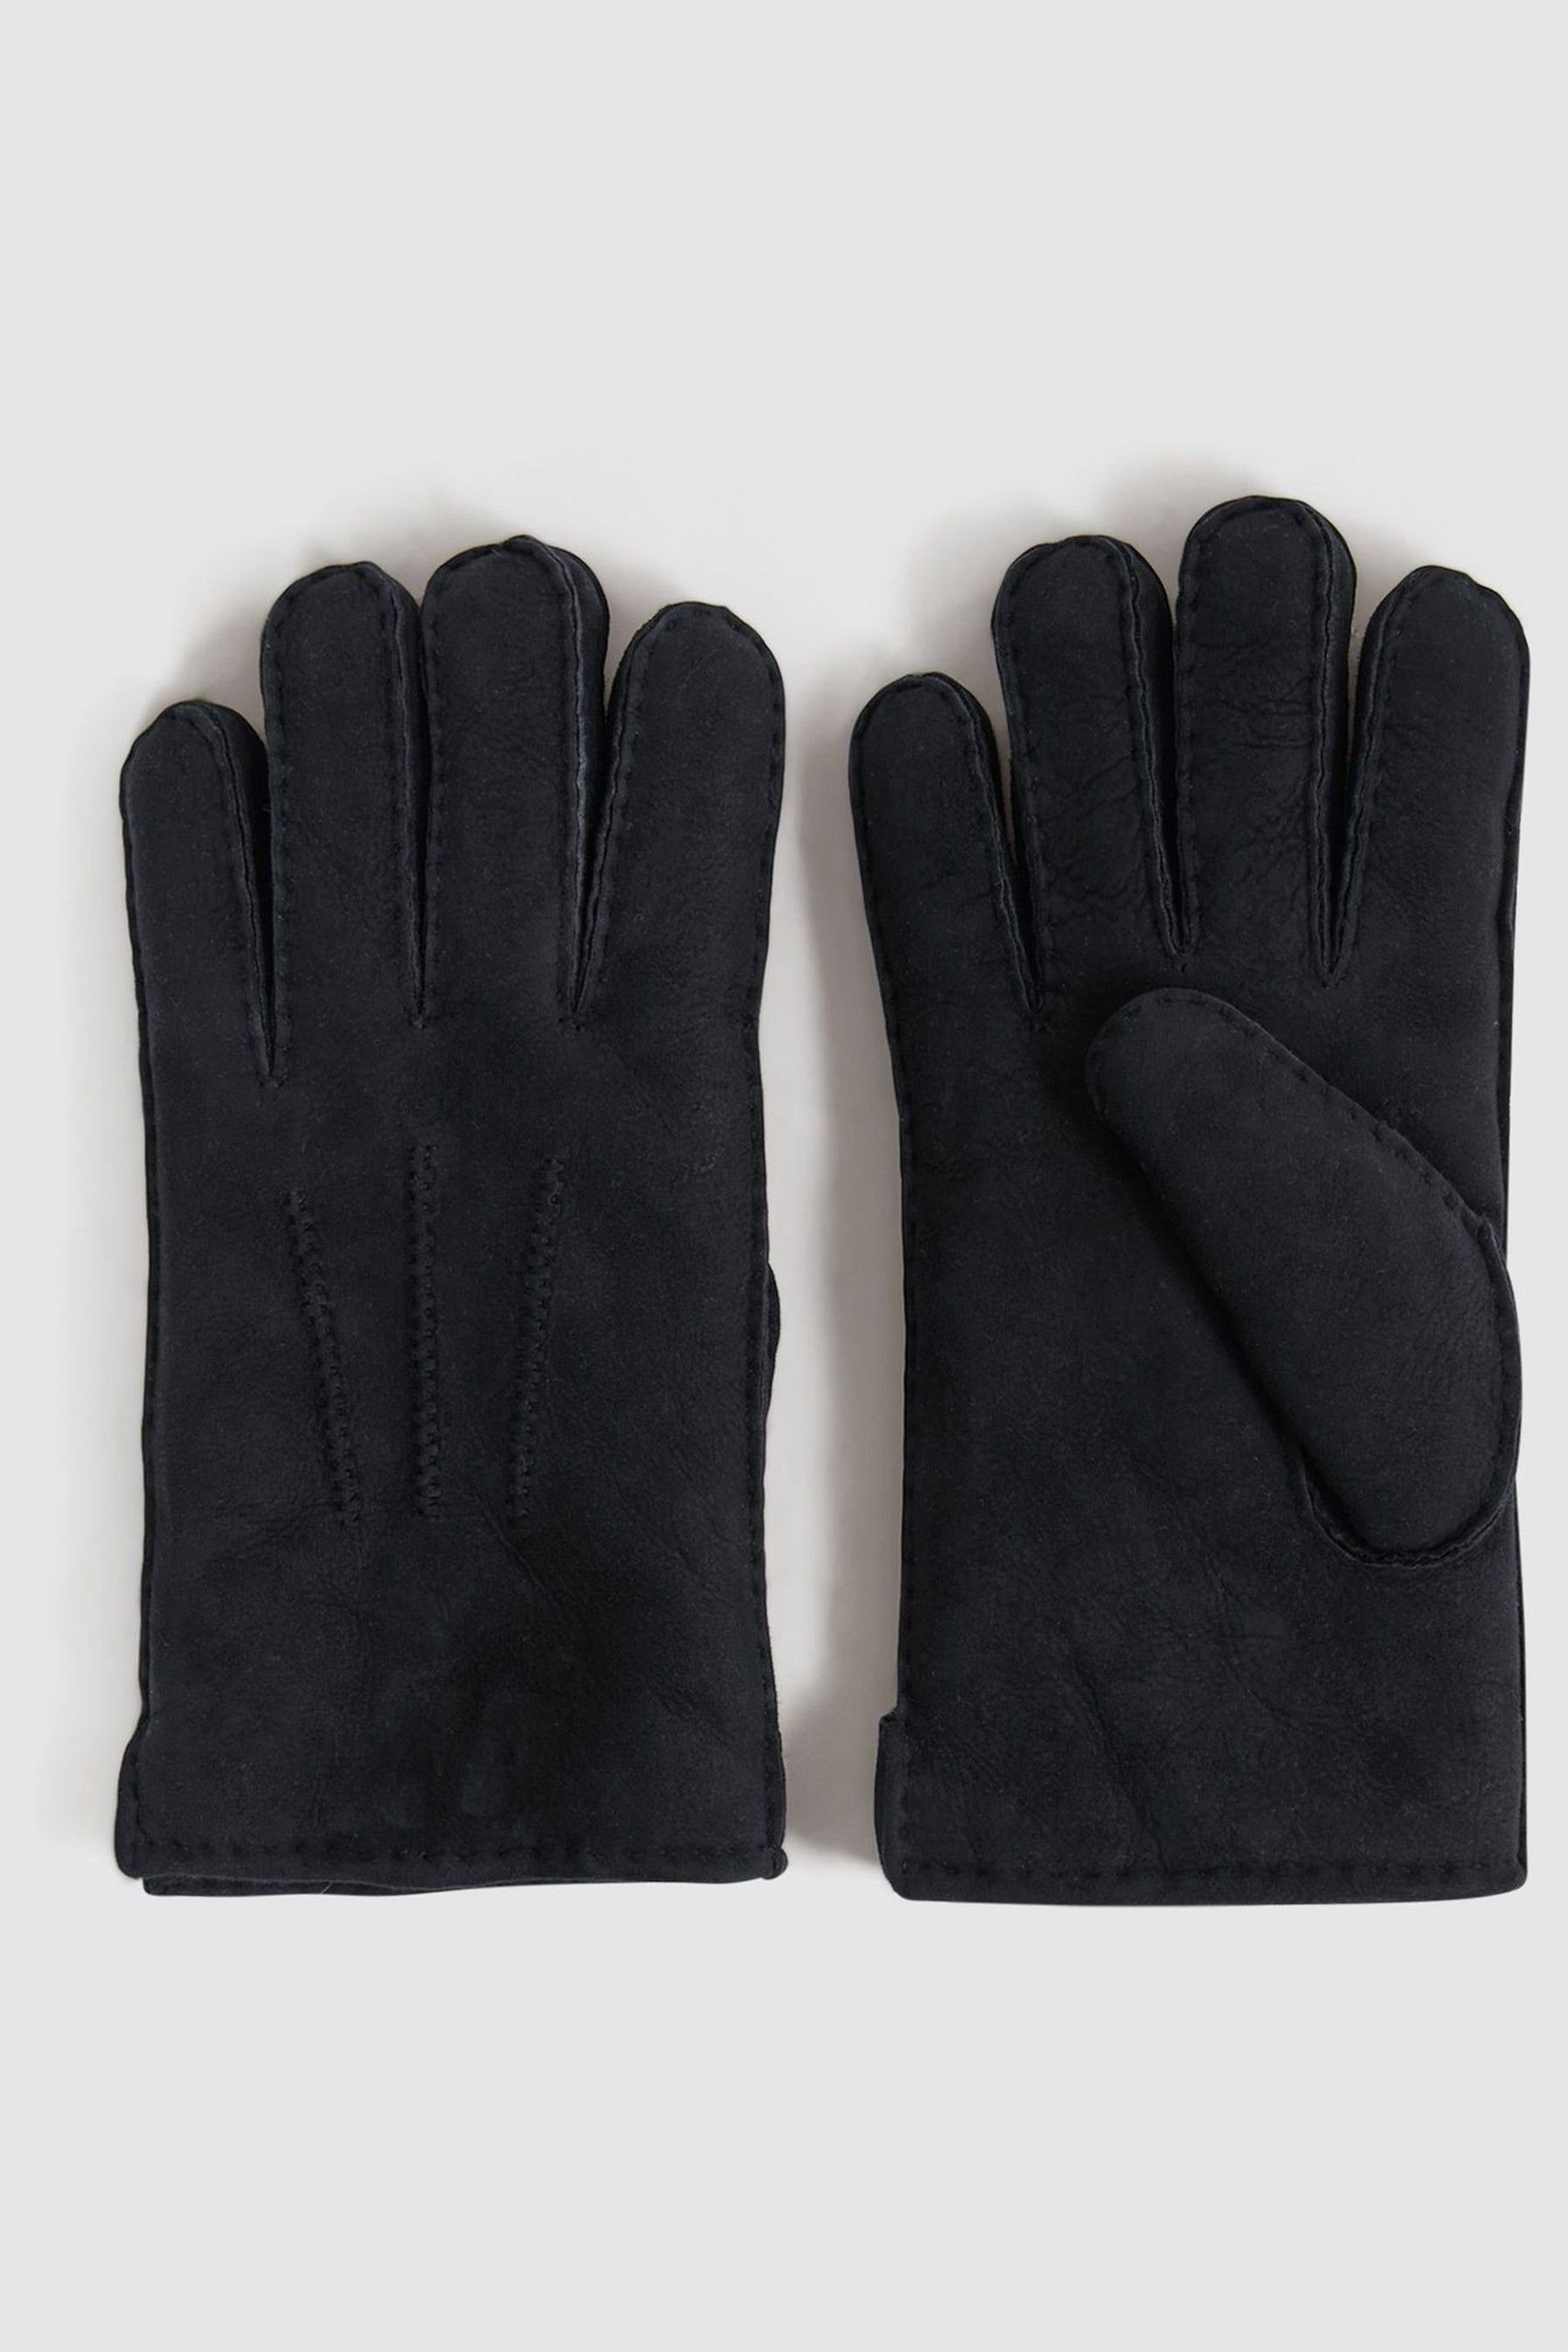 Reiss Aragon - Black Suede Shearling Gloves, S